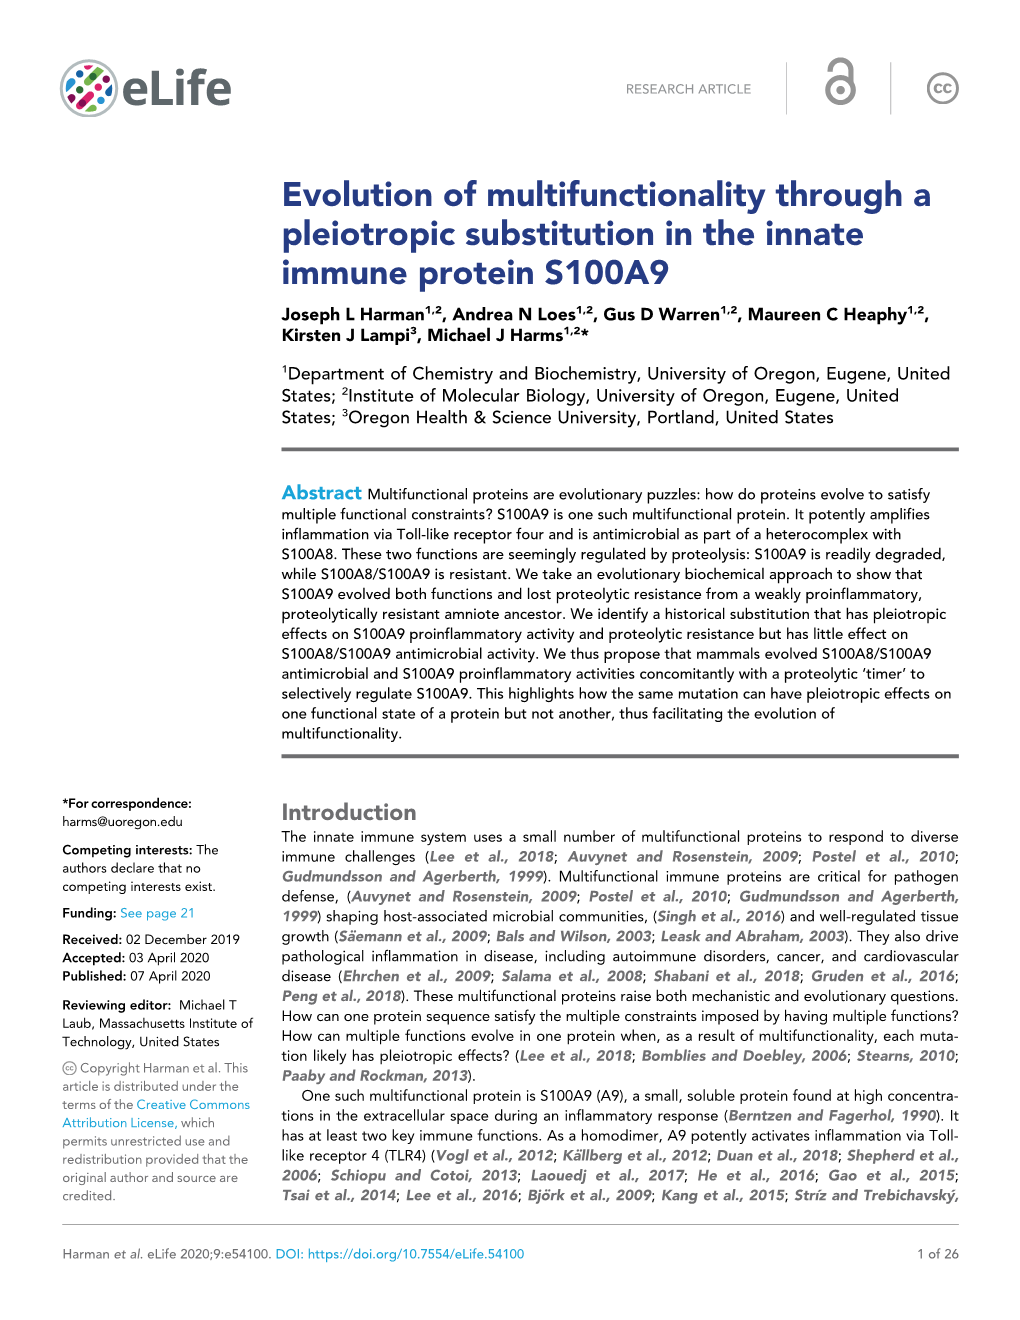 Evolution of Multifunctionality Through a Pleiotropic Substitution in The